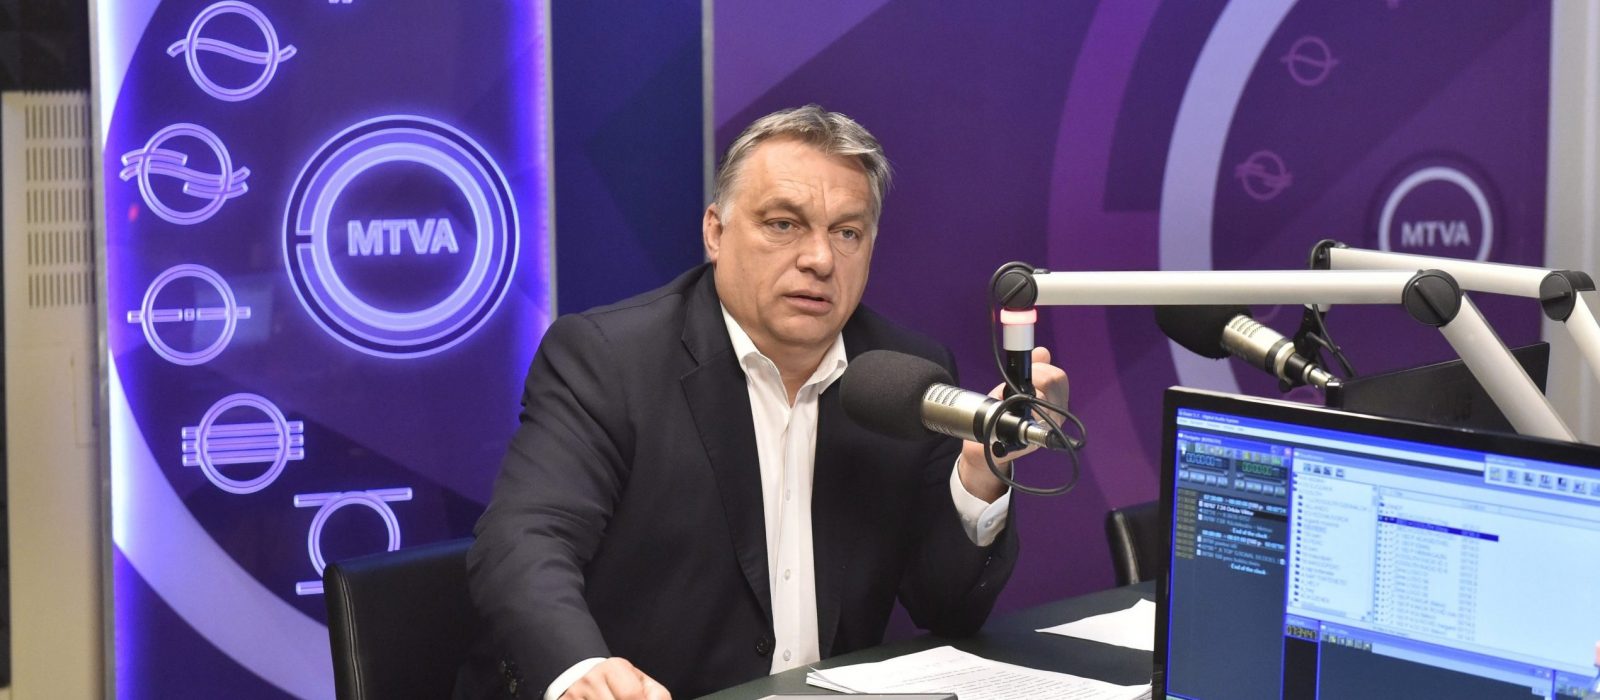 Hungary Set To Face Hardest Week Of Pandemic Yet, Says PM Orbán